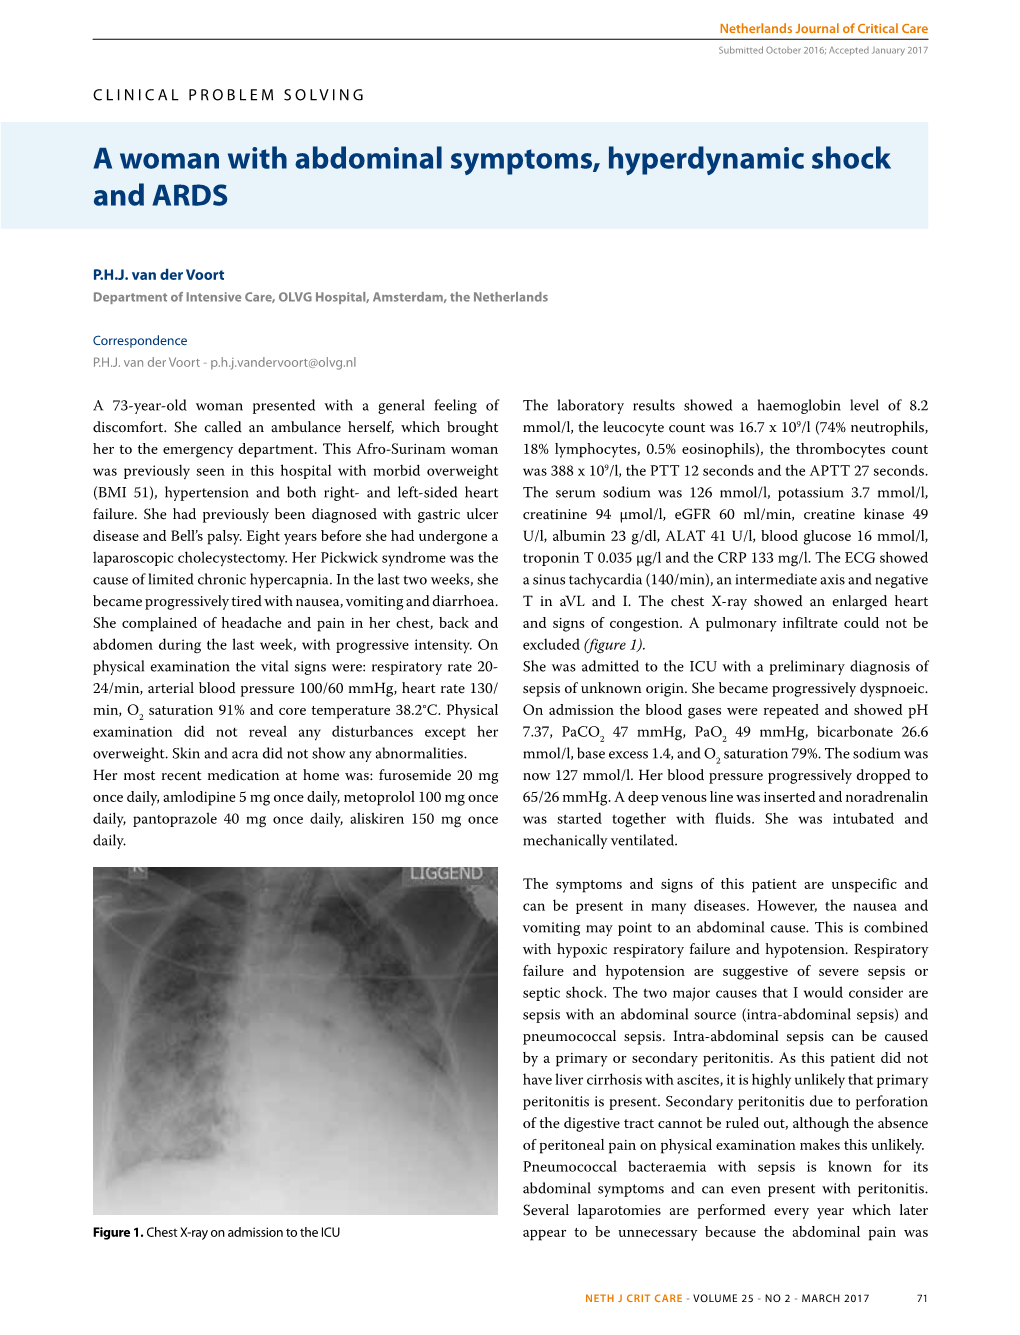 A Woman with Abdominal Symptoms, Hyperdynamic Shock and ARDS